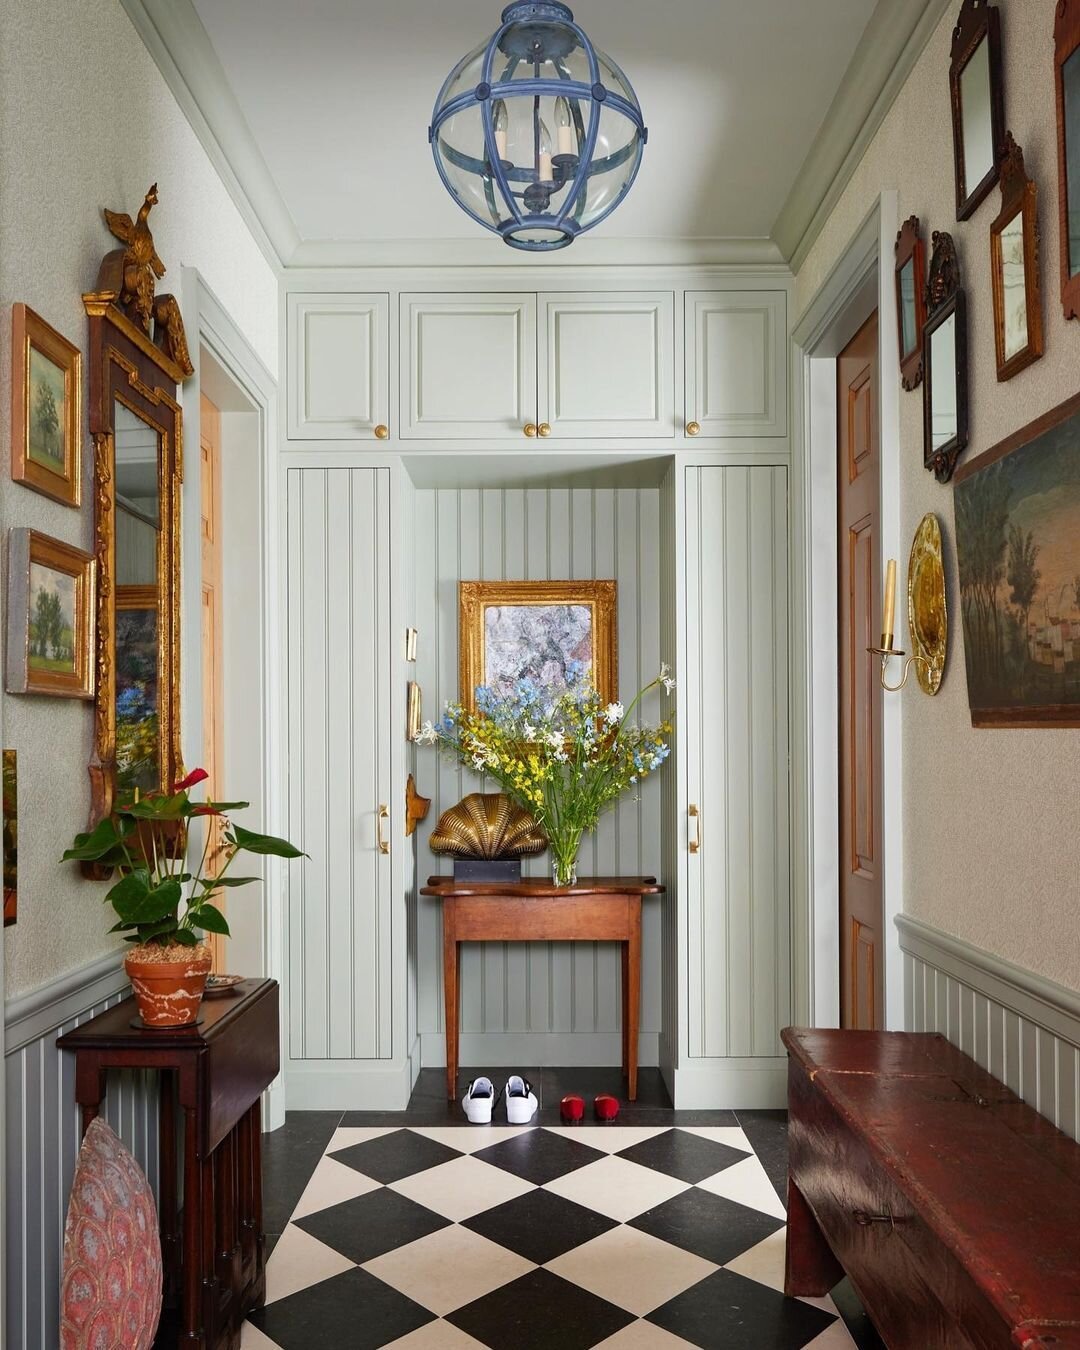 Functional spaces certainly don't have to be boring- this is one stylish hallway! We especially love the clever use of storage (hello, beadboard!) 😍
.
Design: @saragilbaneinteriors
.
#classicsouthernstyle #traditionalhome #grandmillenialstyle #class